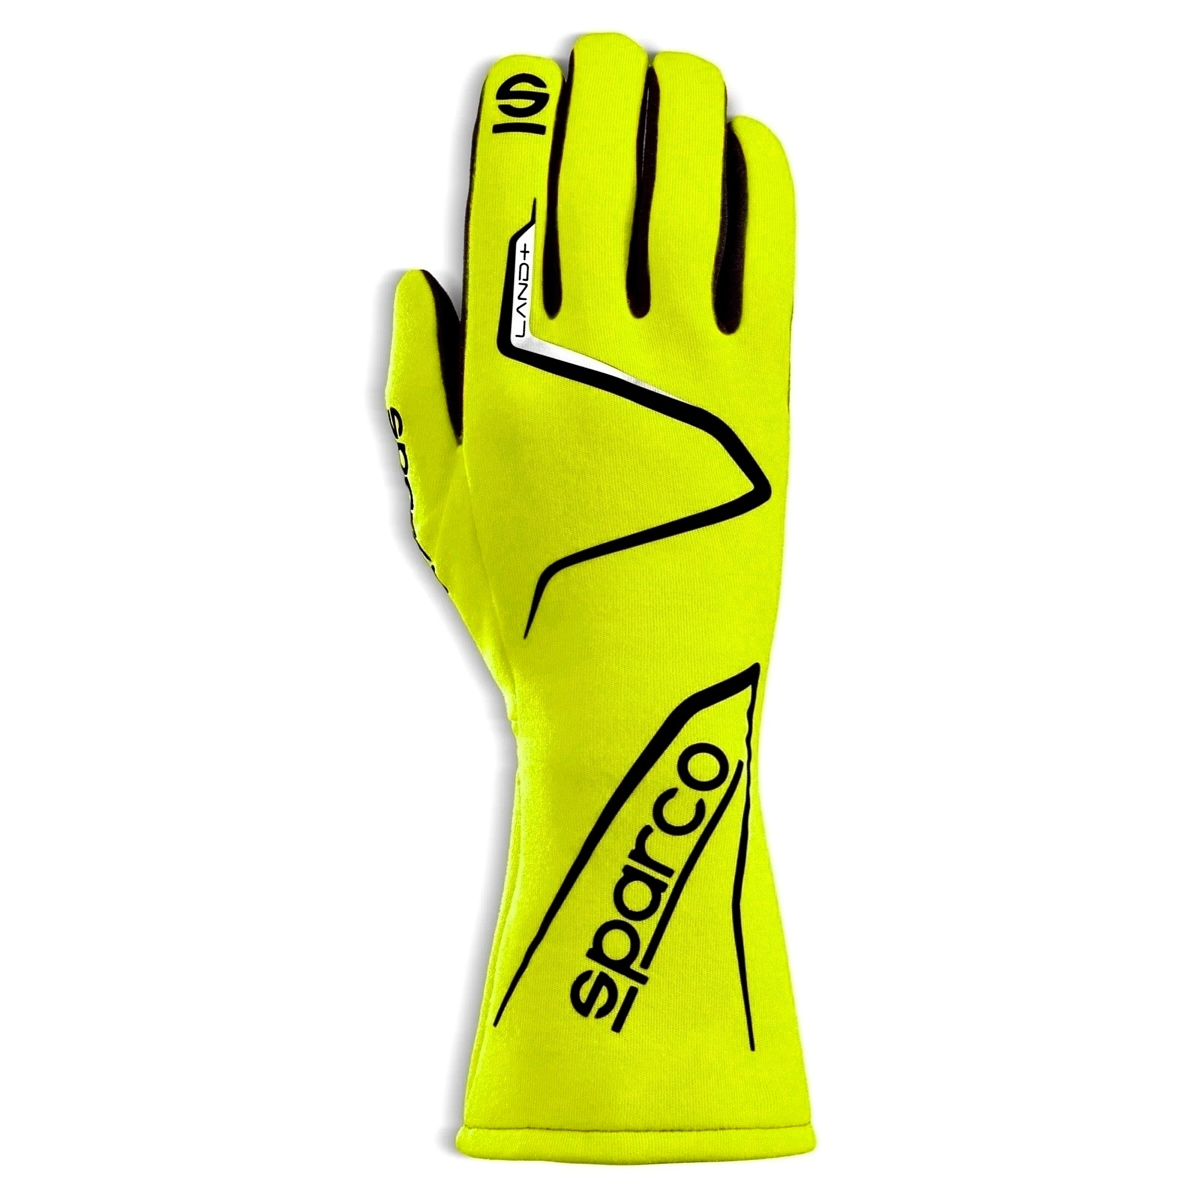 Sparco 00136309GF Driving Gloves, Land, SFI 3.3/5, FIA Approved, Single Layer, Fire Retardant Fabric, Yellow, Small, Pair